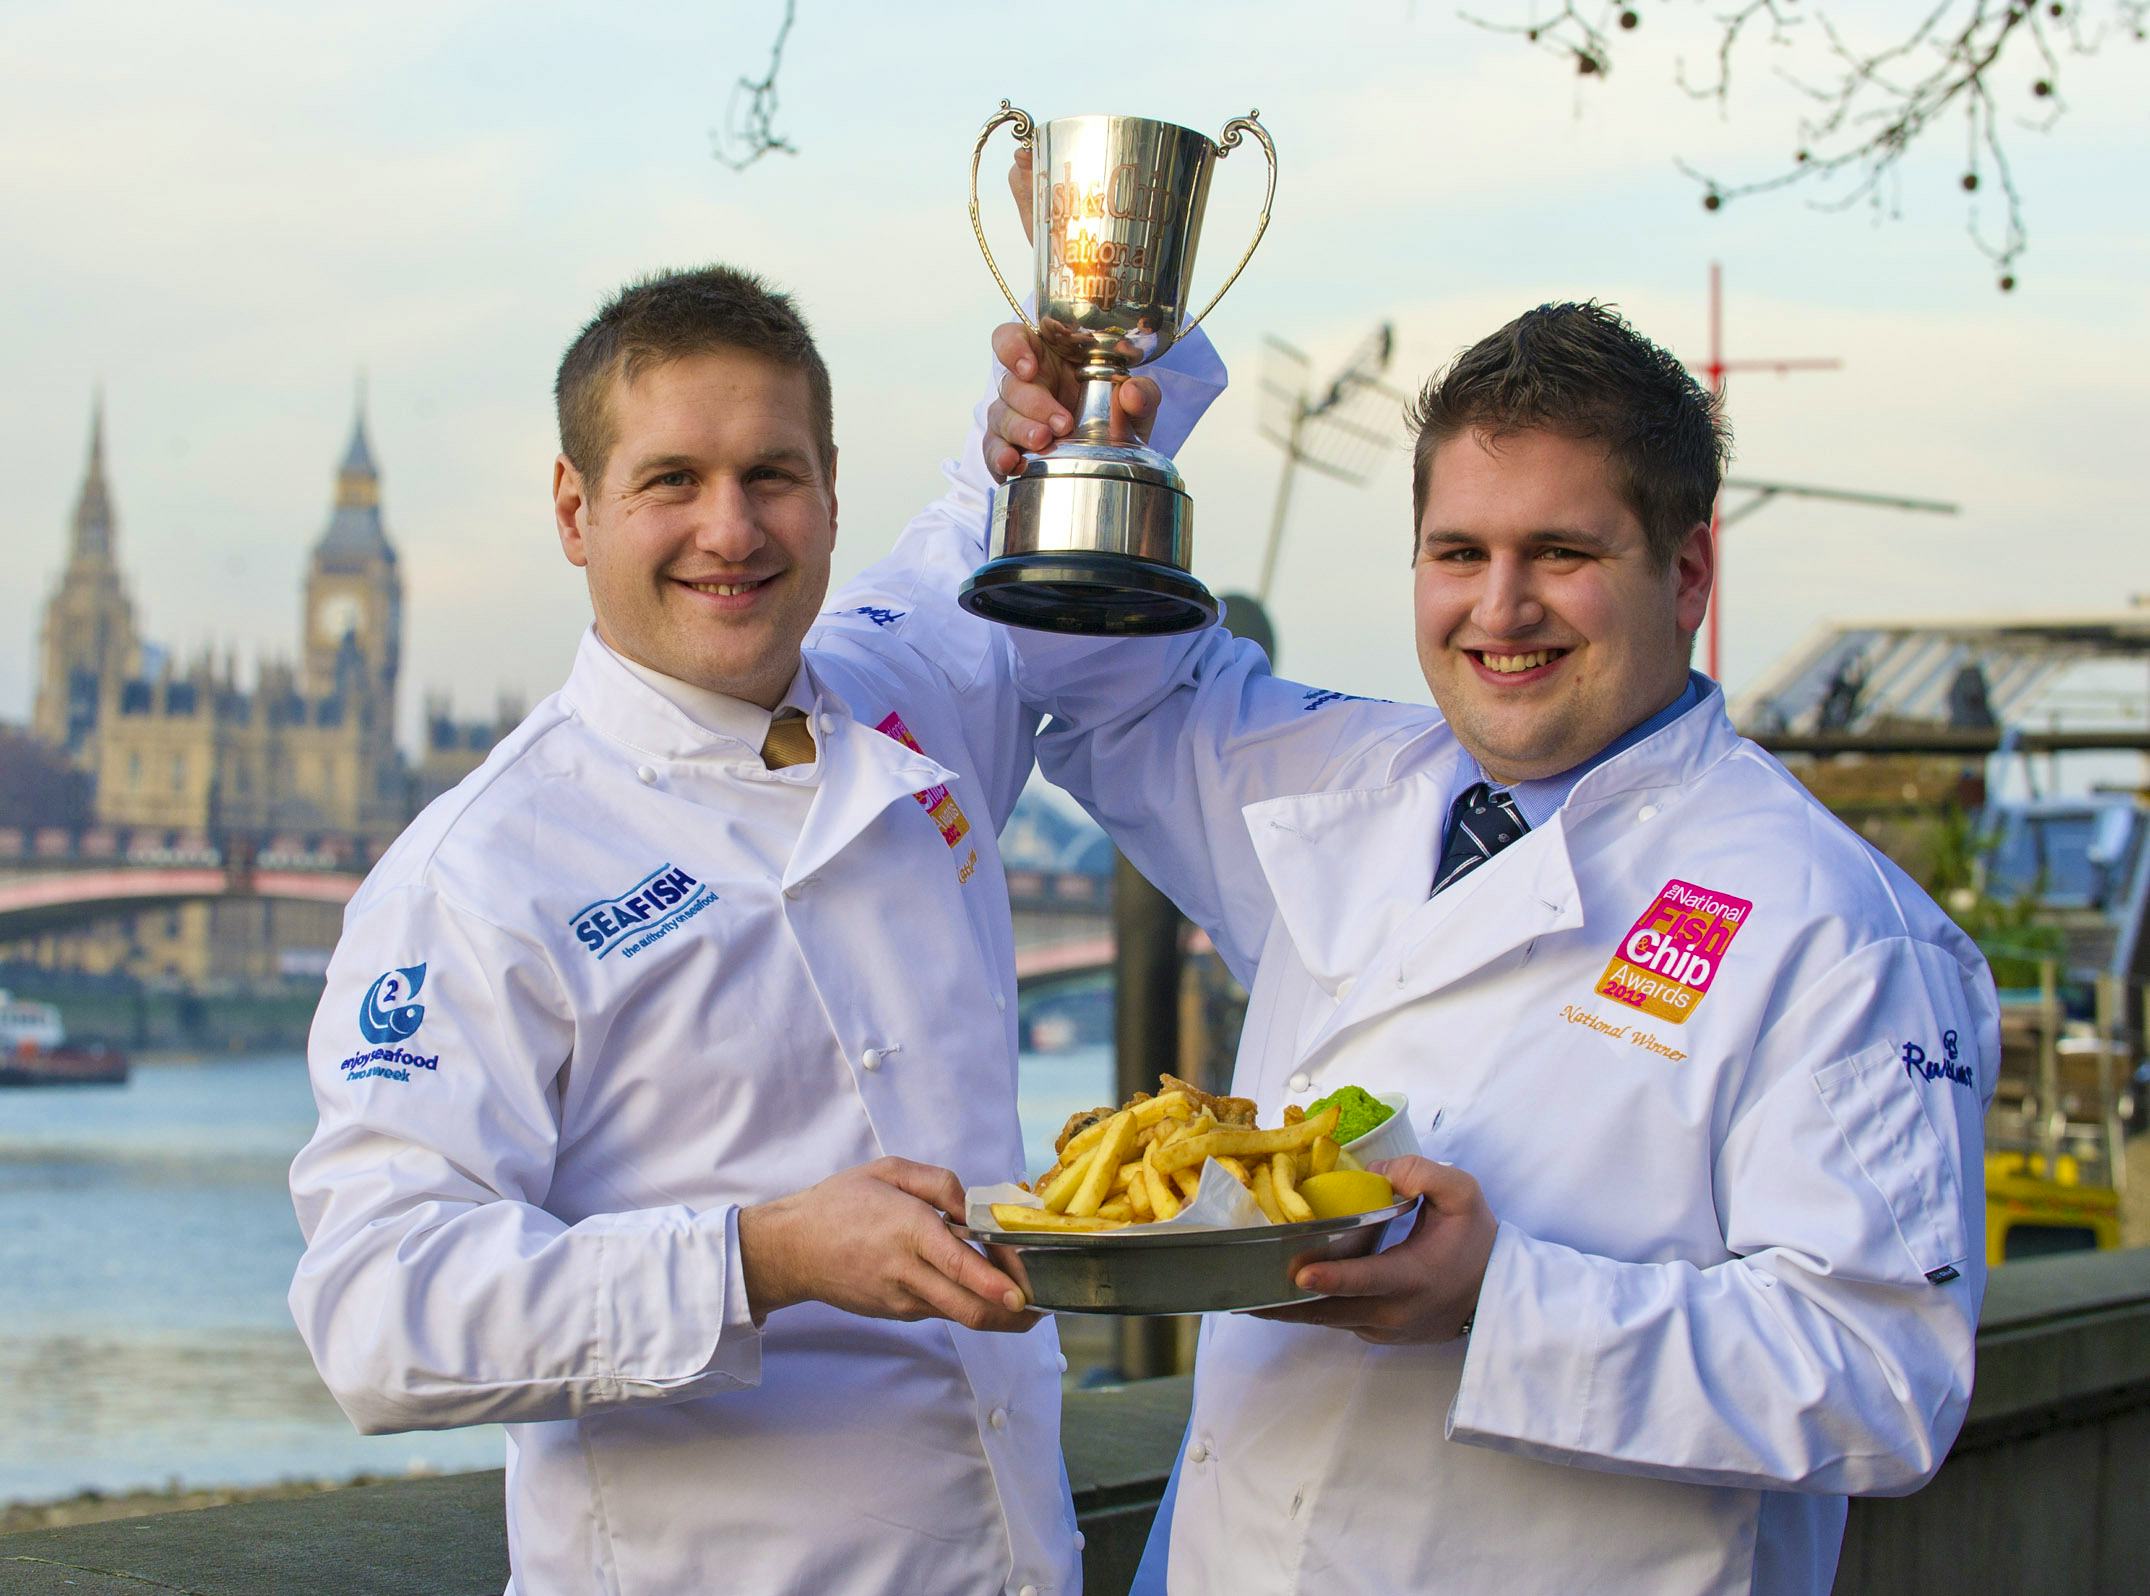 Seniors best fish and chip shop 2012 - Brit_fish_and_Chip_shop_winners_Seafare.jpg